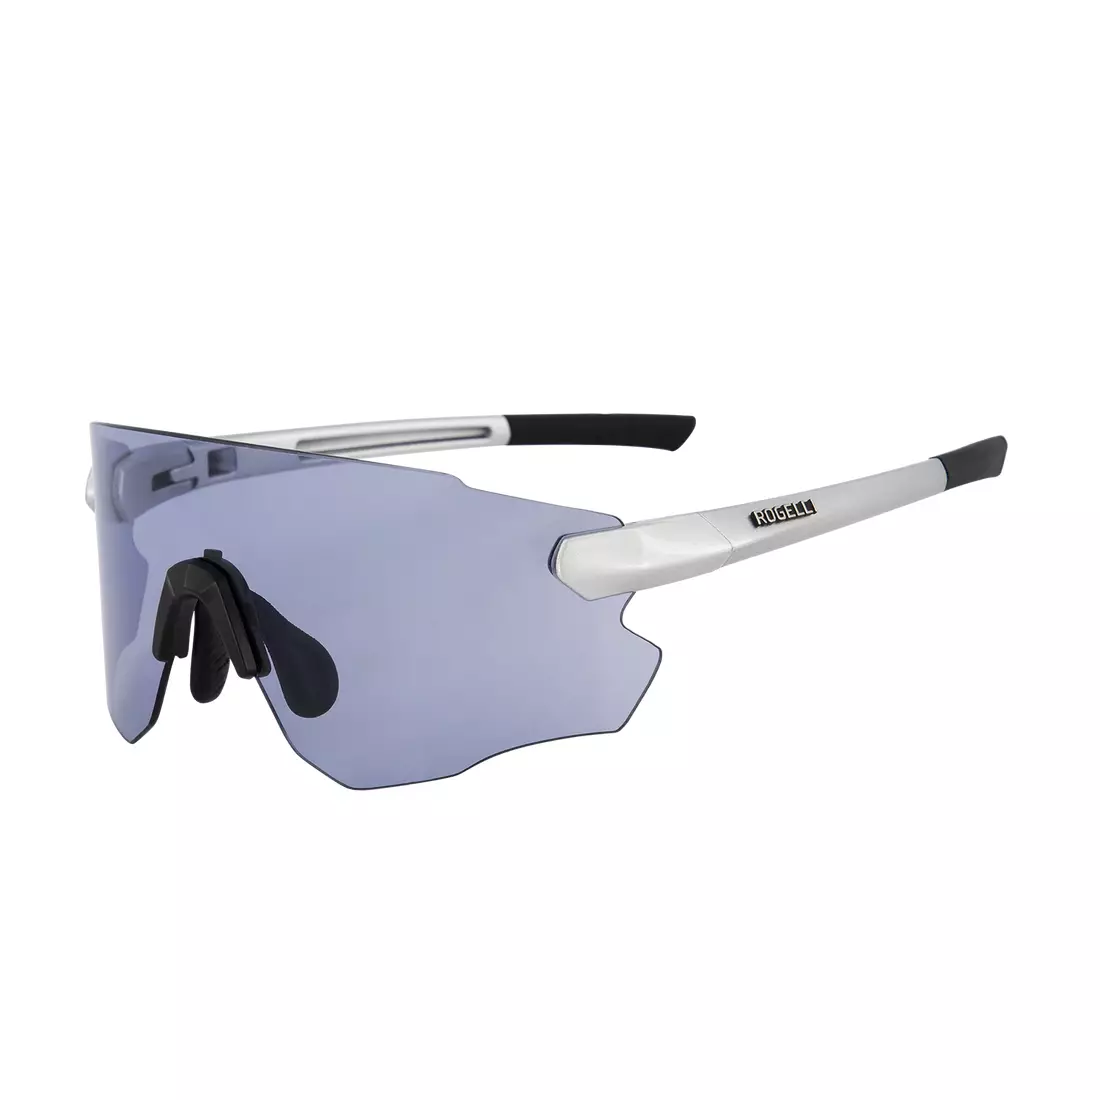 ROGELLI sports glasses with replaceable lenses VISTA grey